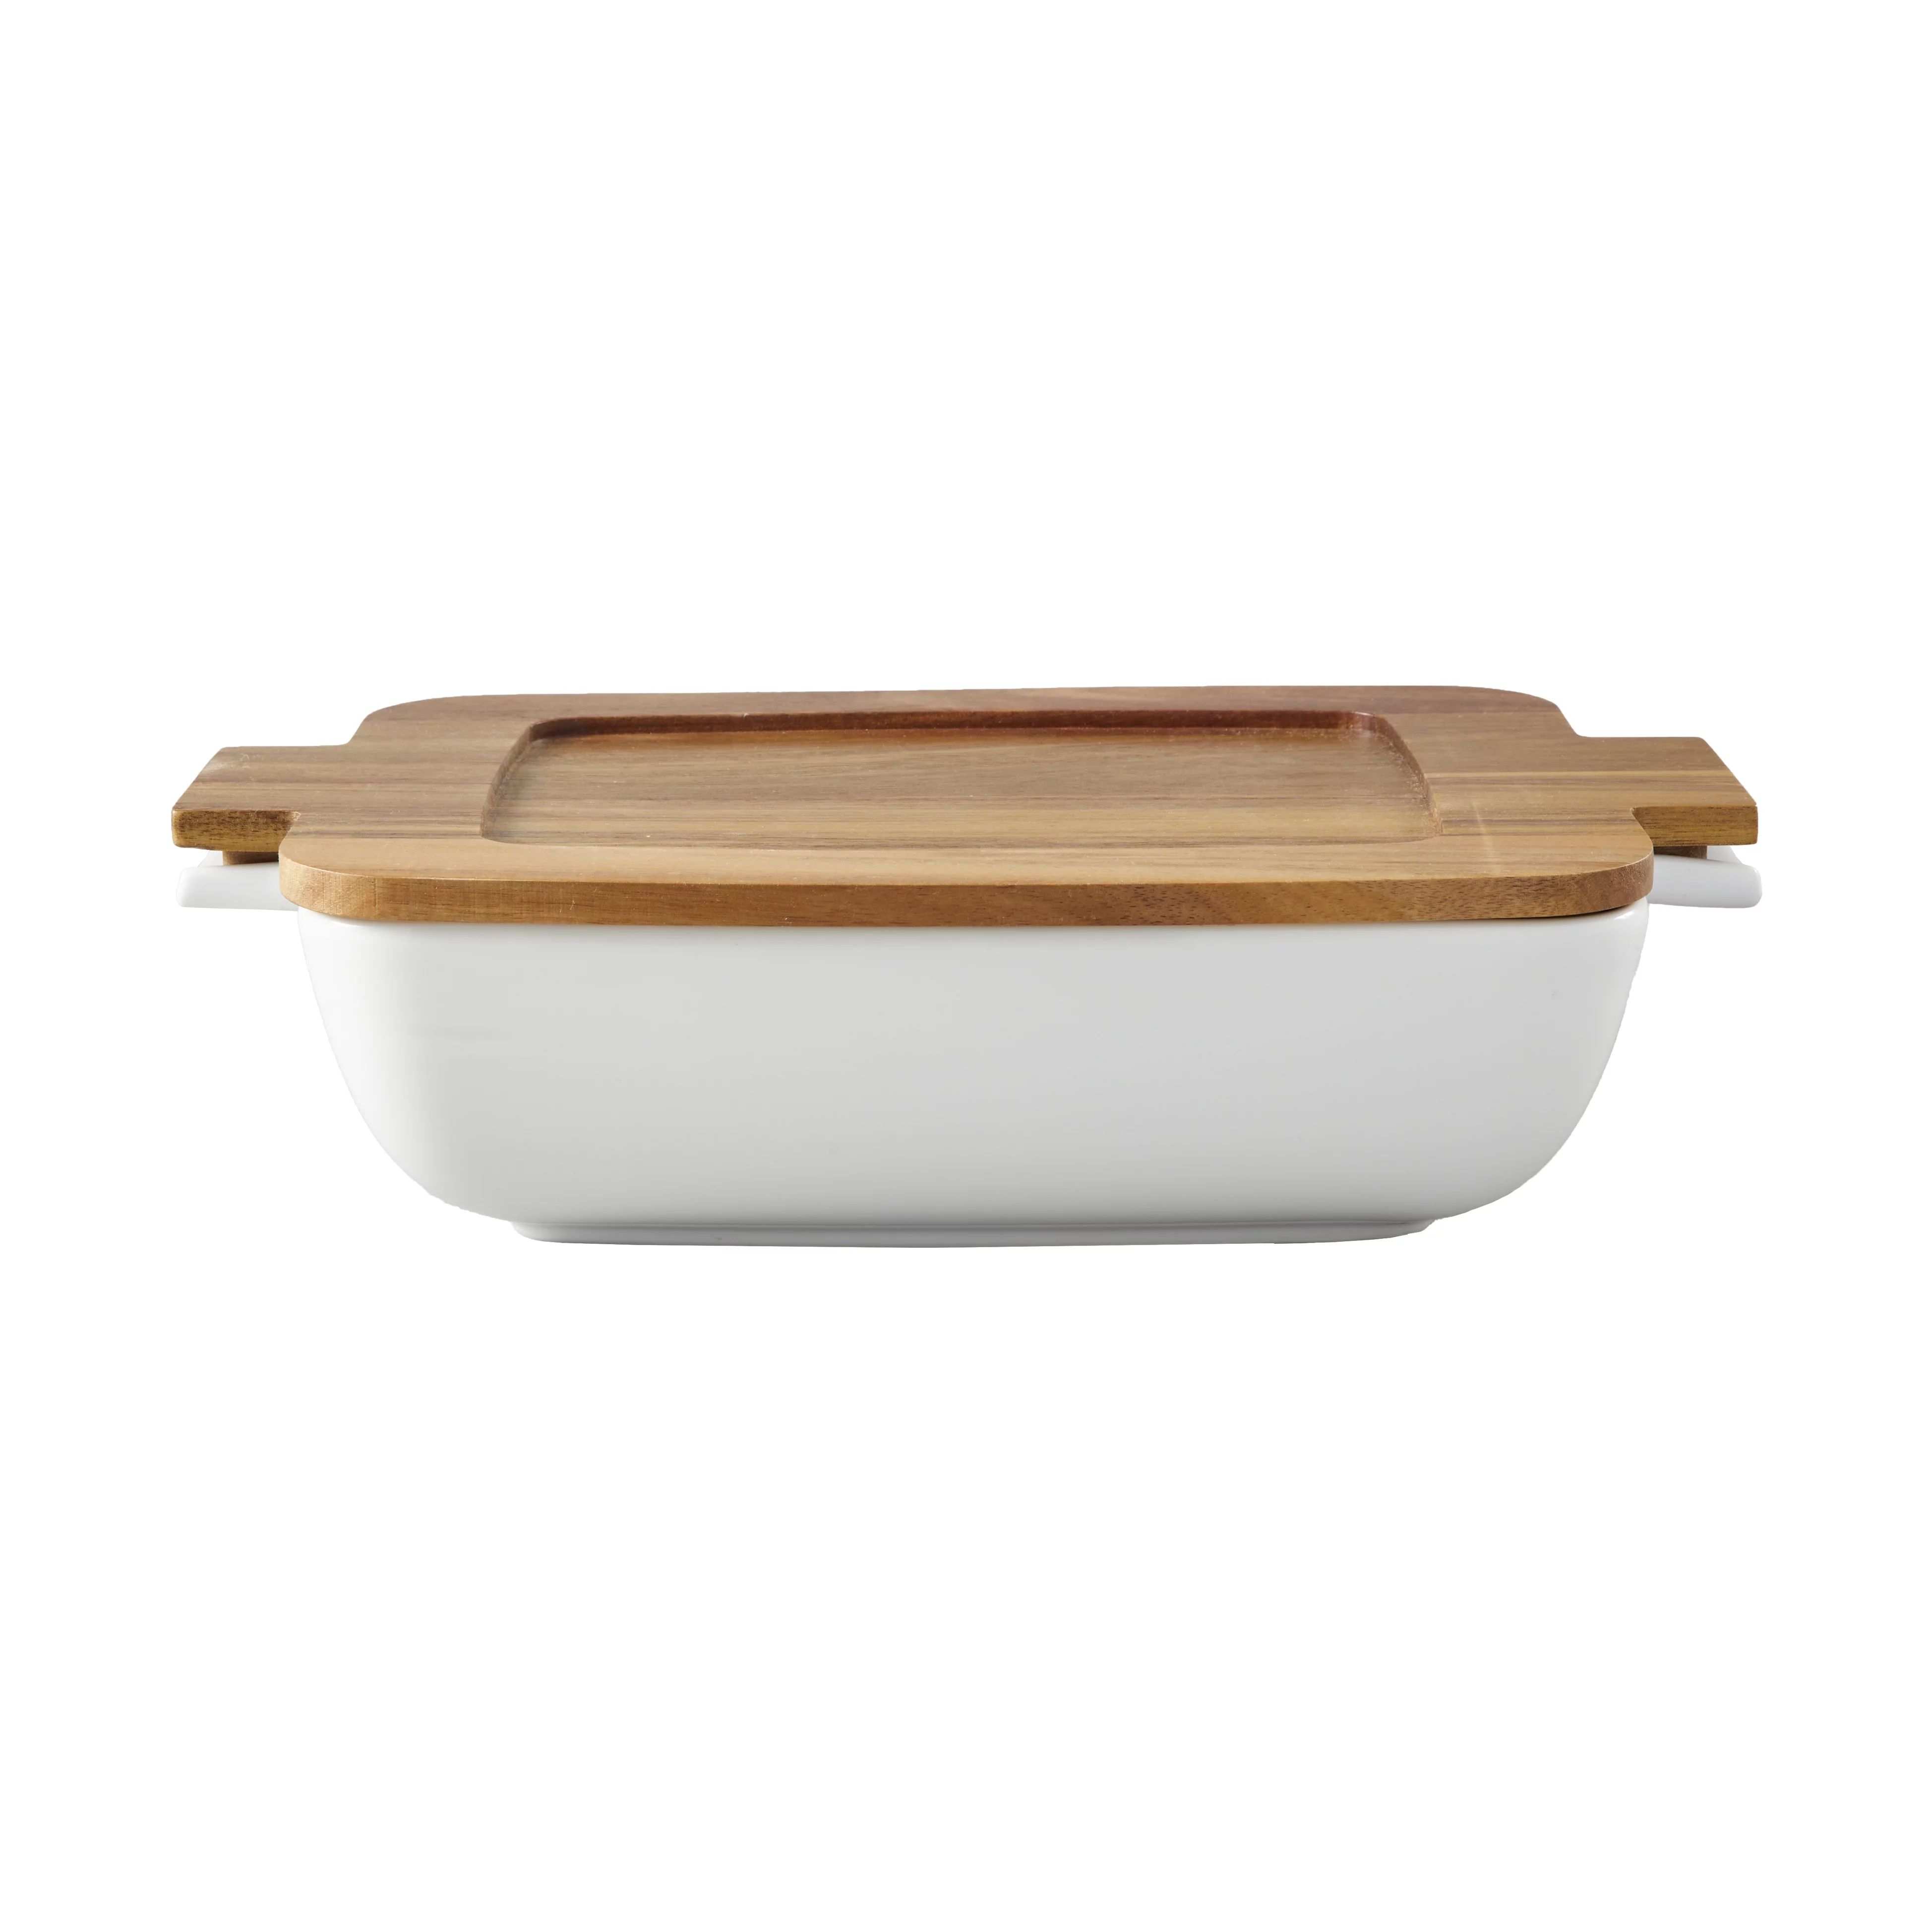 Better Homes & Gardens Ceramic Oven to Table Serveware Dish with Acacia Lid, 13.39 x 9.06 x 3.39 ... | Walmart (US)